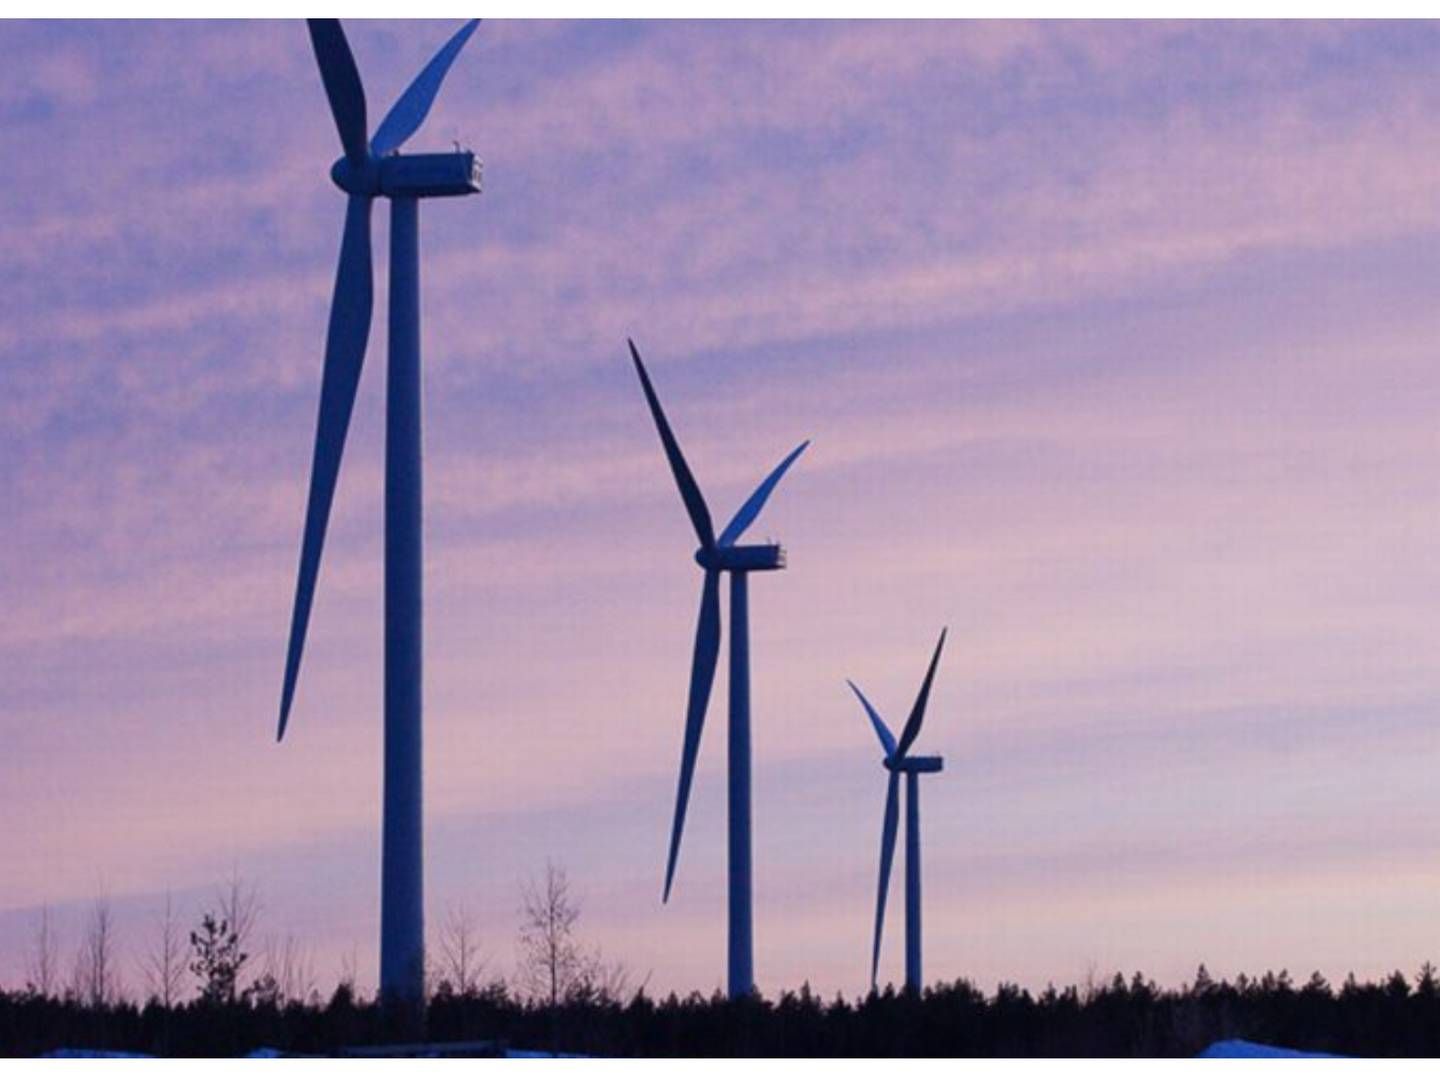 Finland is expected to become energy self-sufficient within two years by increasing domestic production especially in nuclear and wind power. | Photo: PR Exilion.